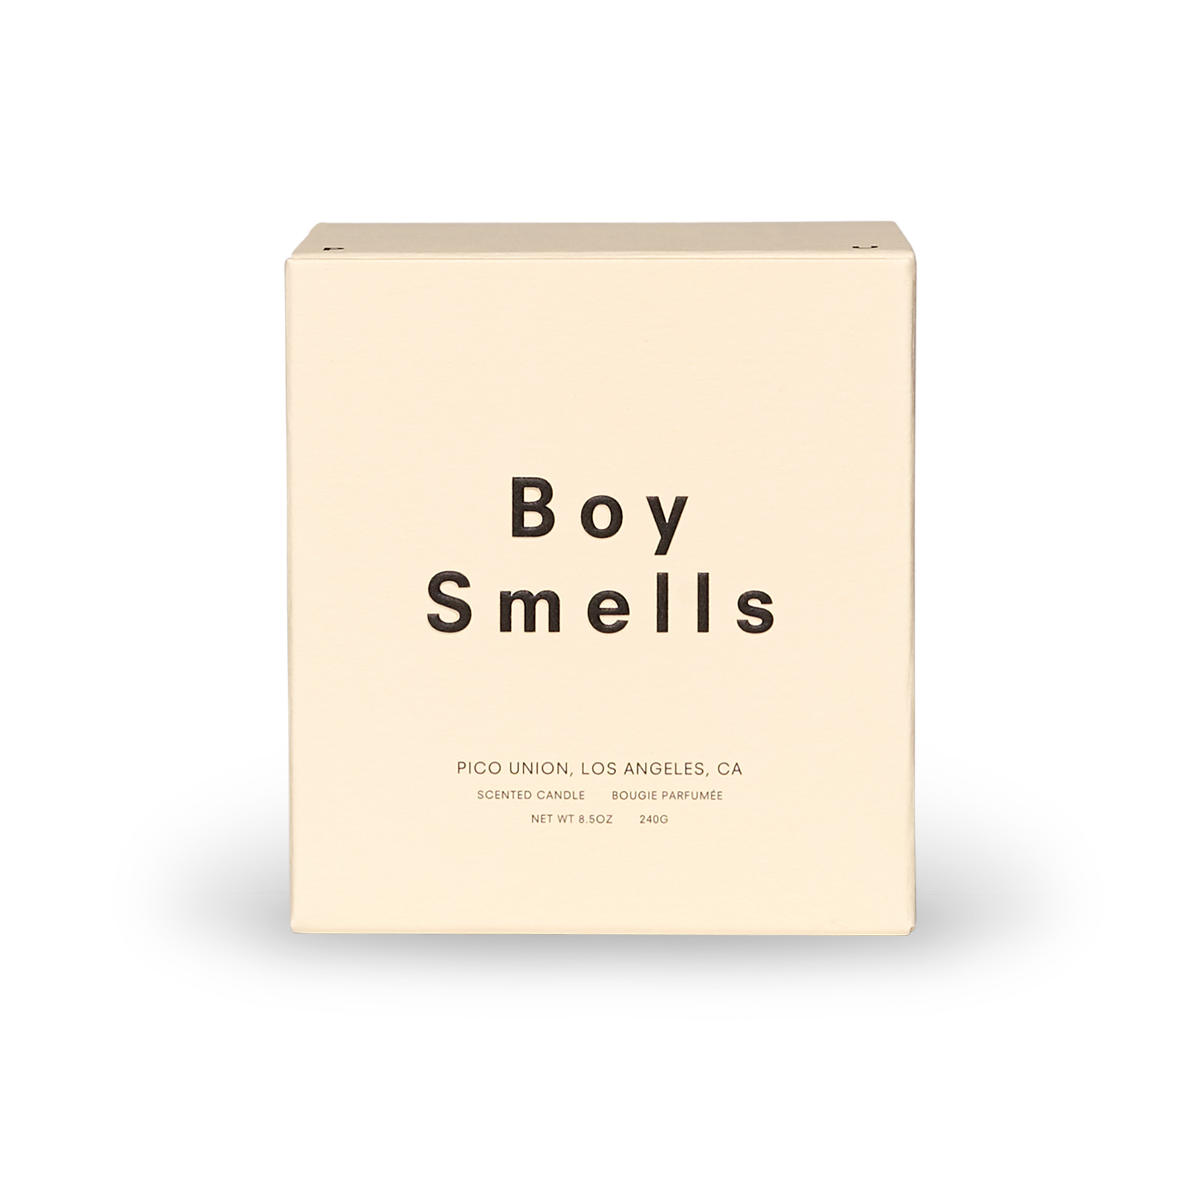 Boy smells California scented candle